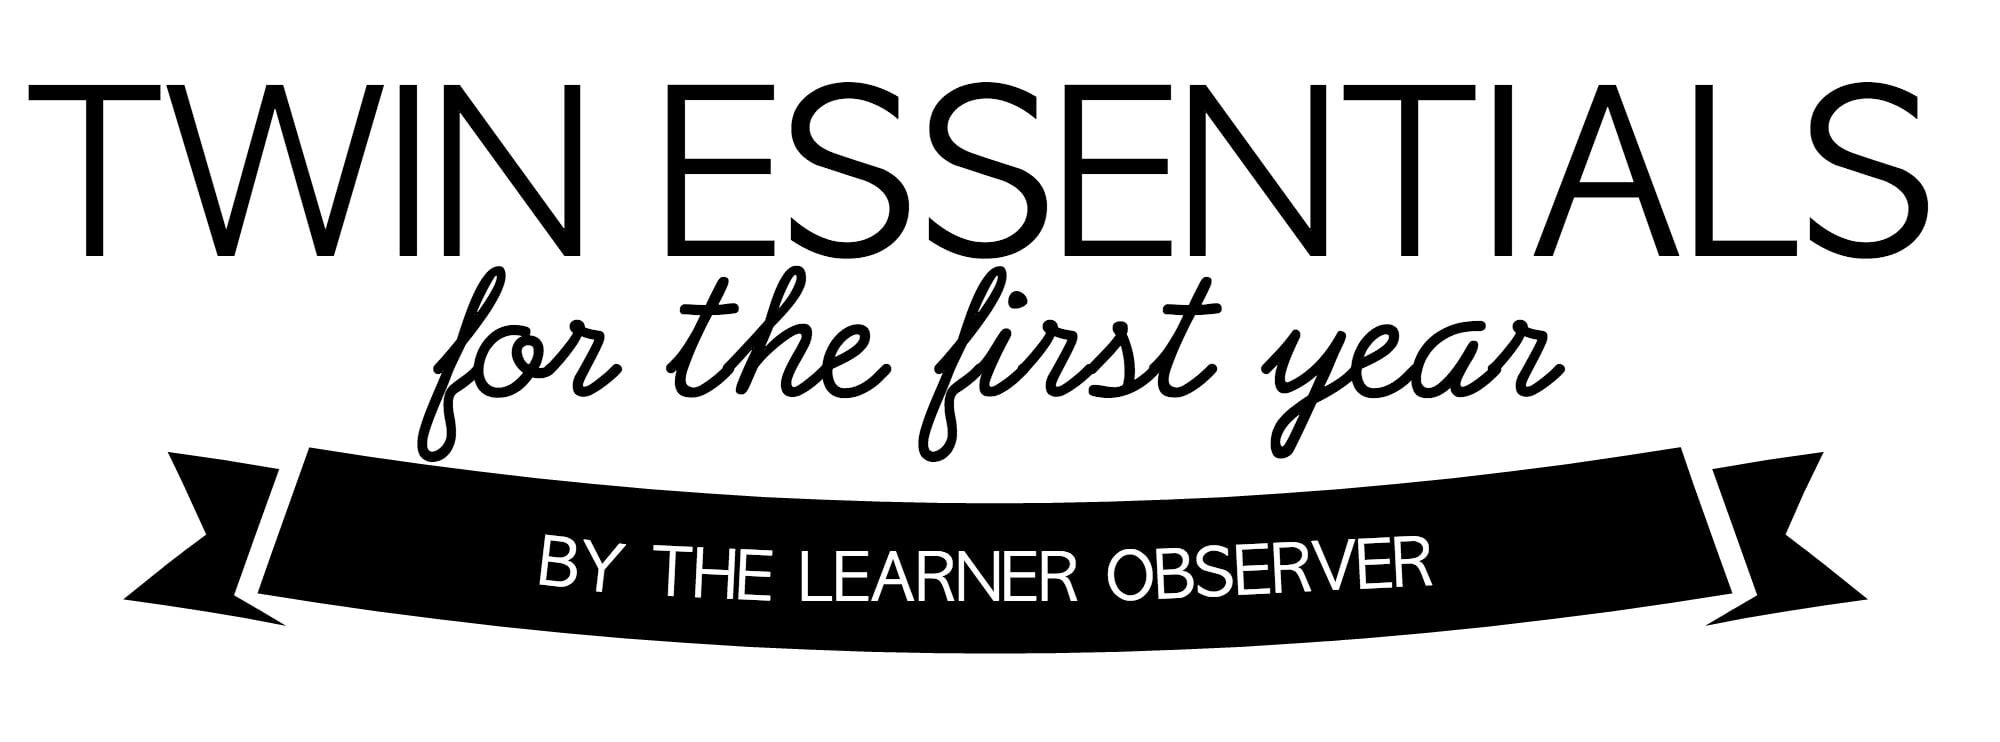 TWIN ESSENTIALS FOR THE FIRST YEAR - THE LEARNER OBSERVER